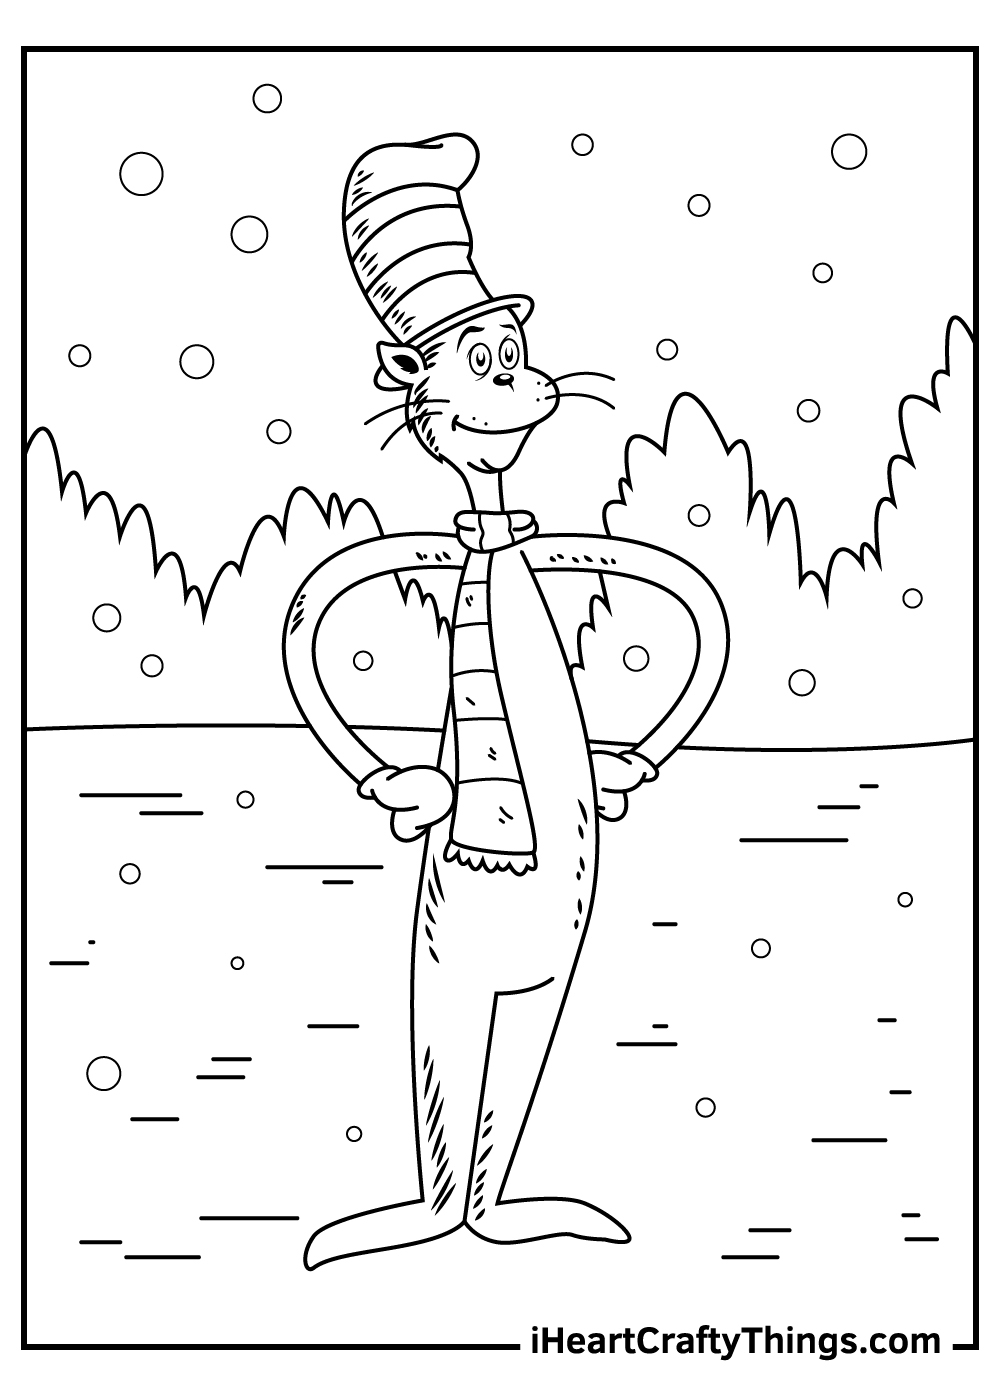 Cat In The Hat Coloring Pages 100 Free Printables - Free Printable Cat In The Hat Pictures